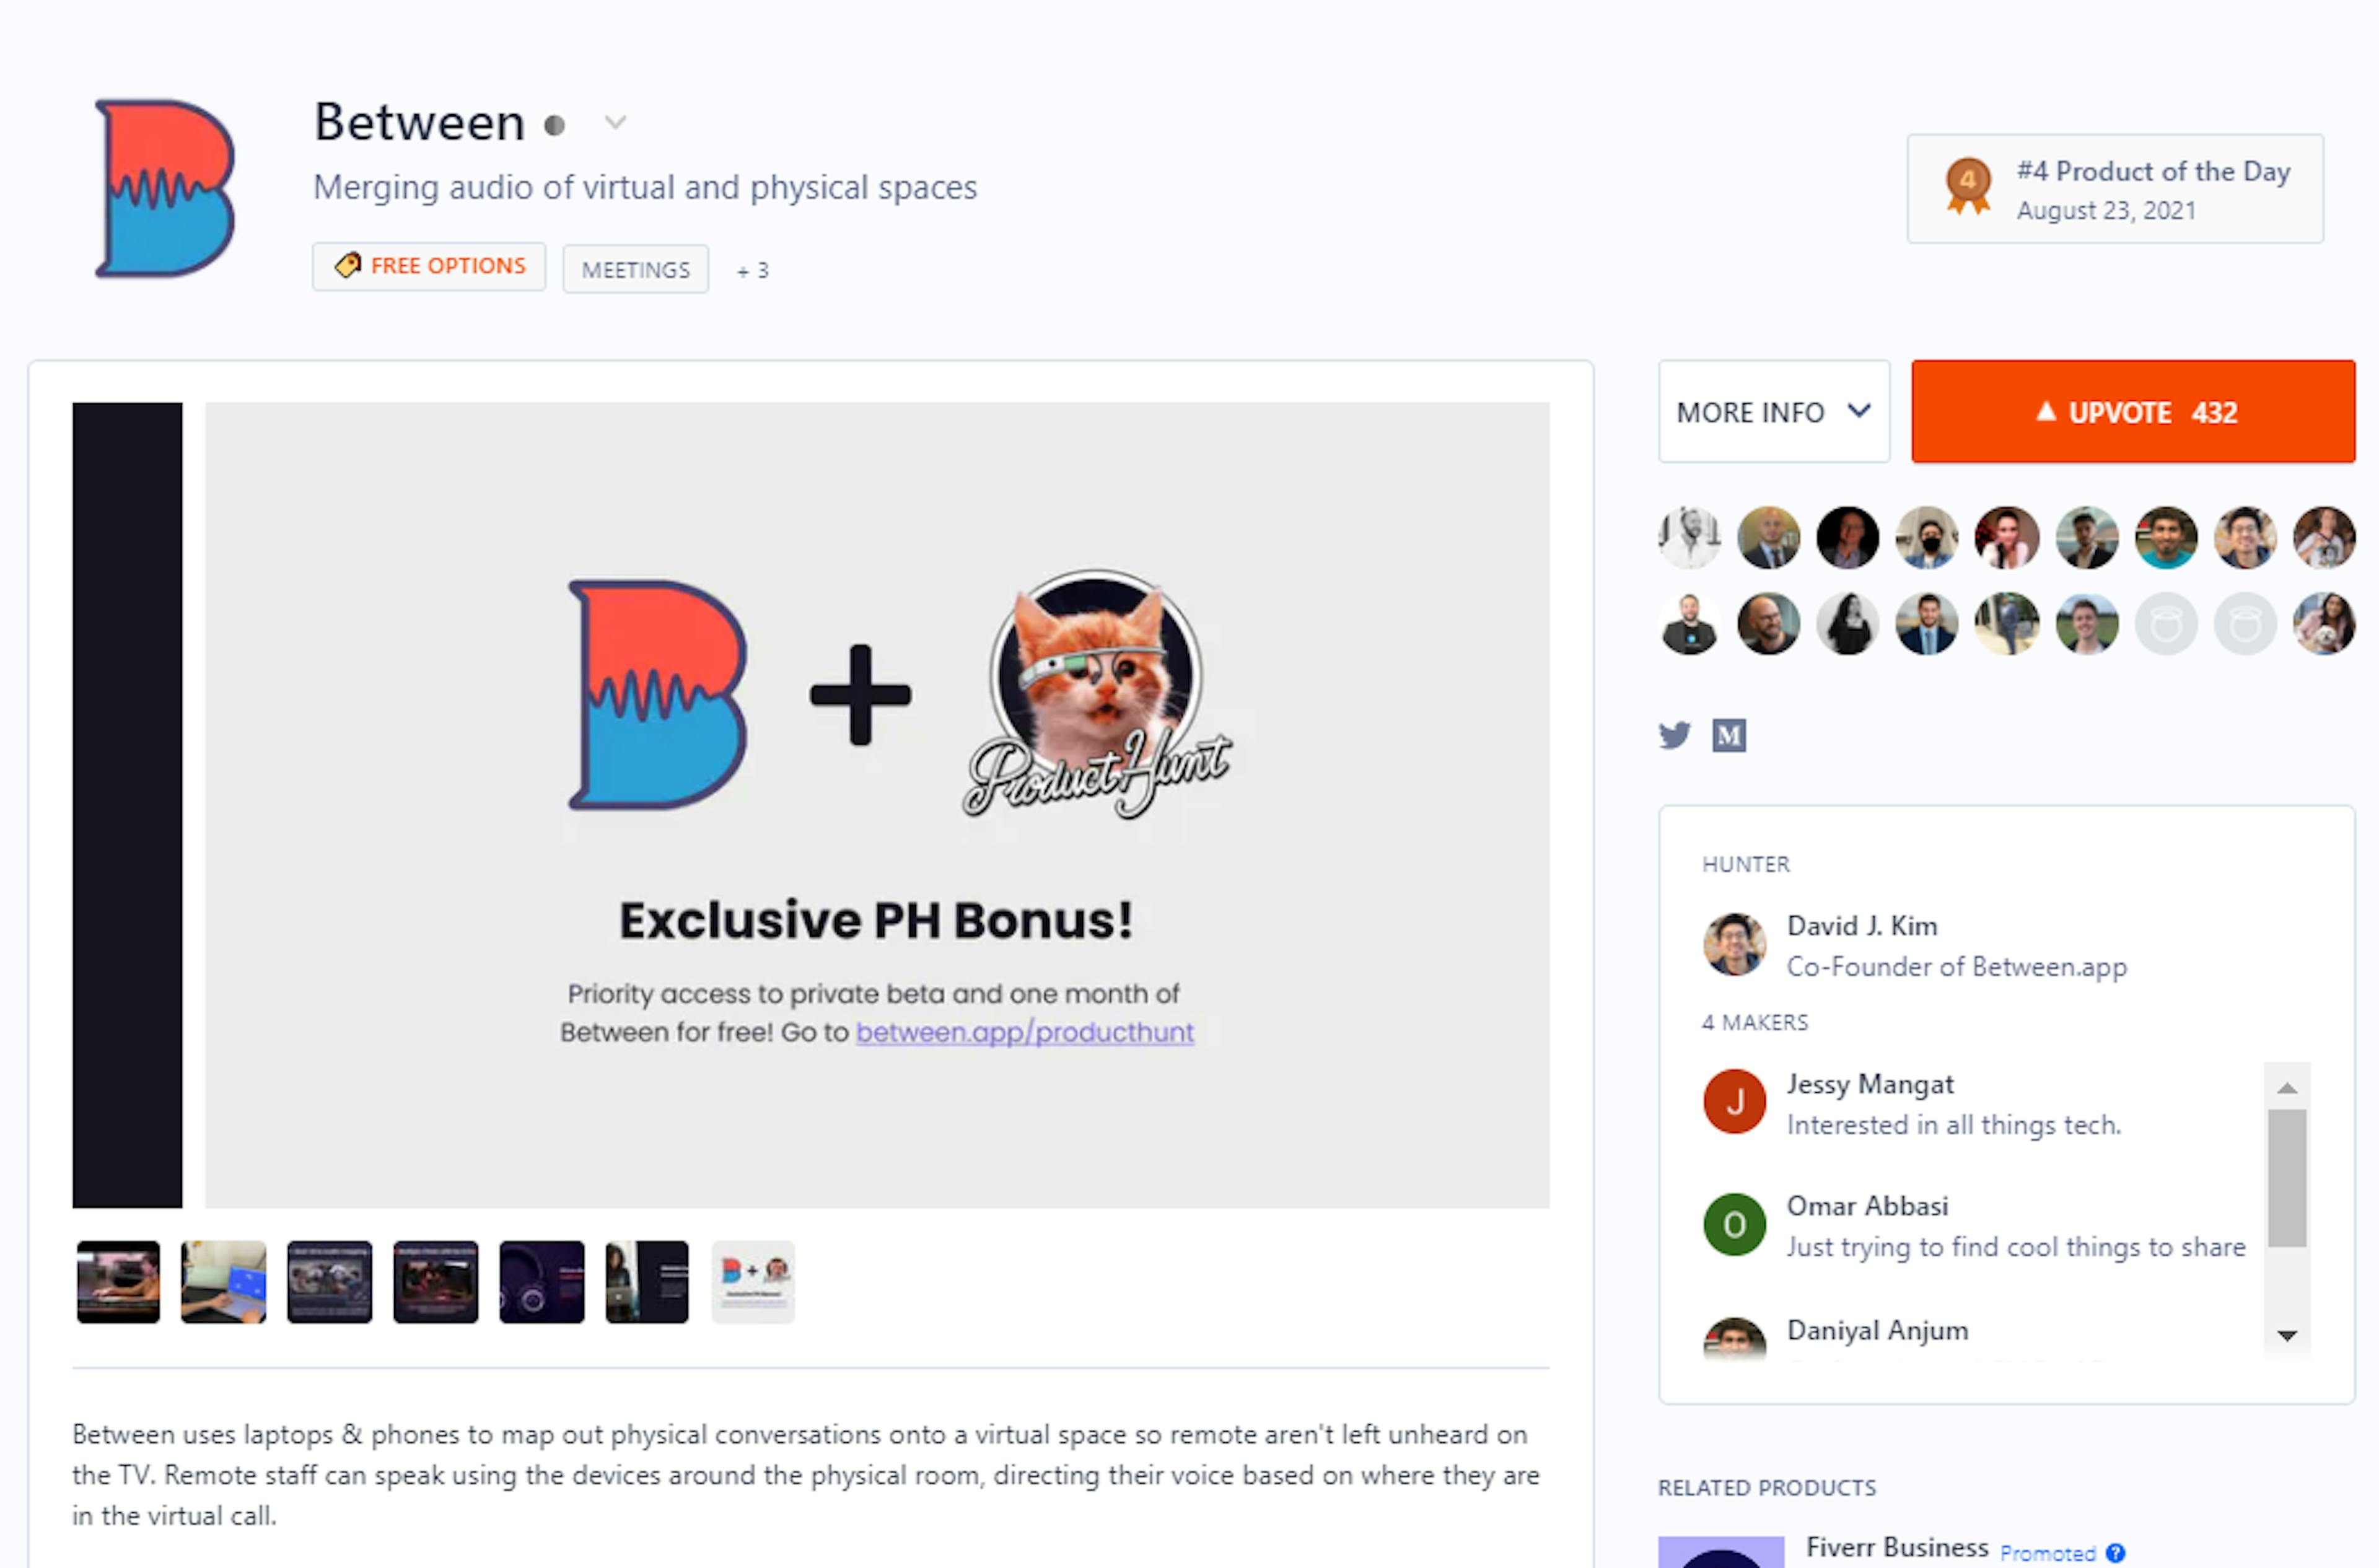 Between ranking 4th product of the day on ProductHunt on August 23rd, 2021